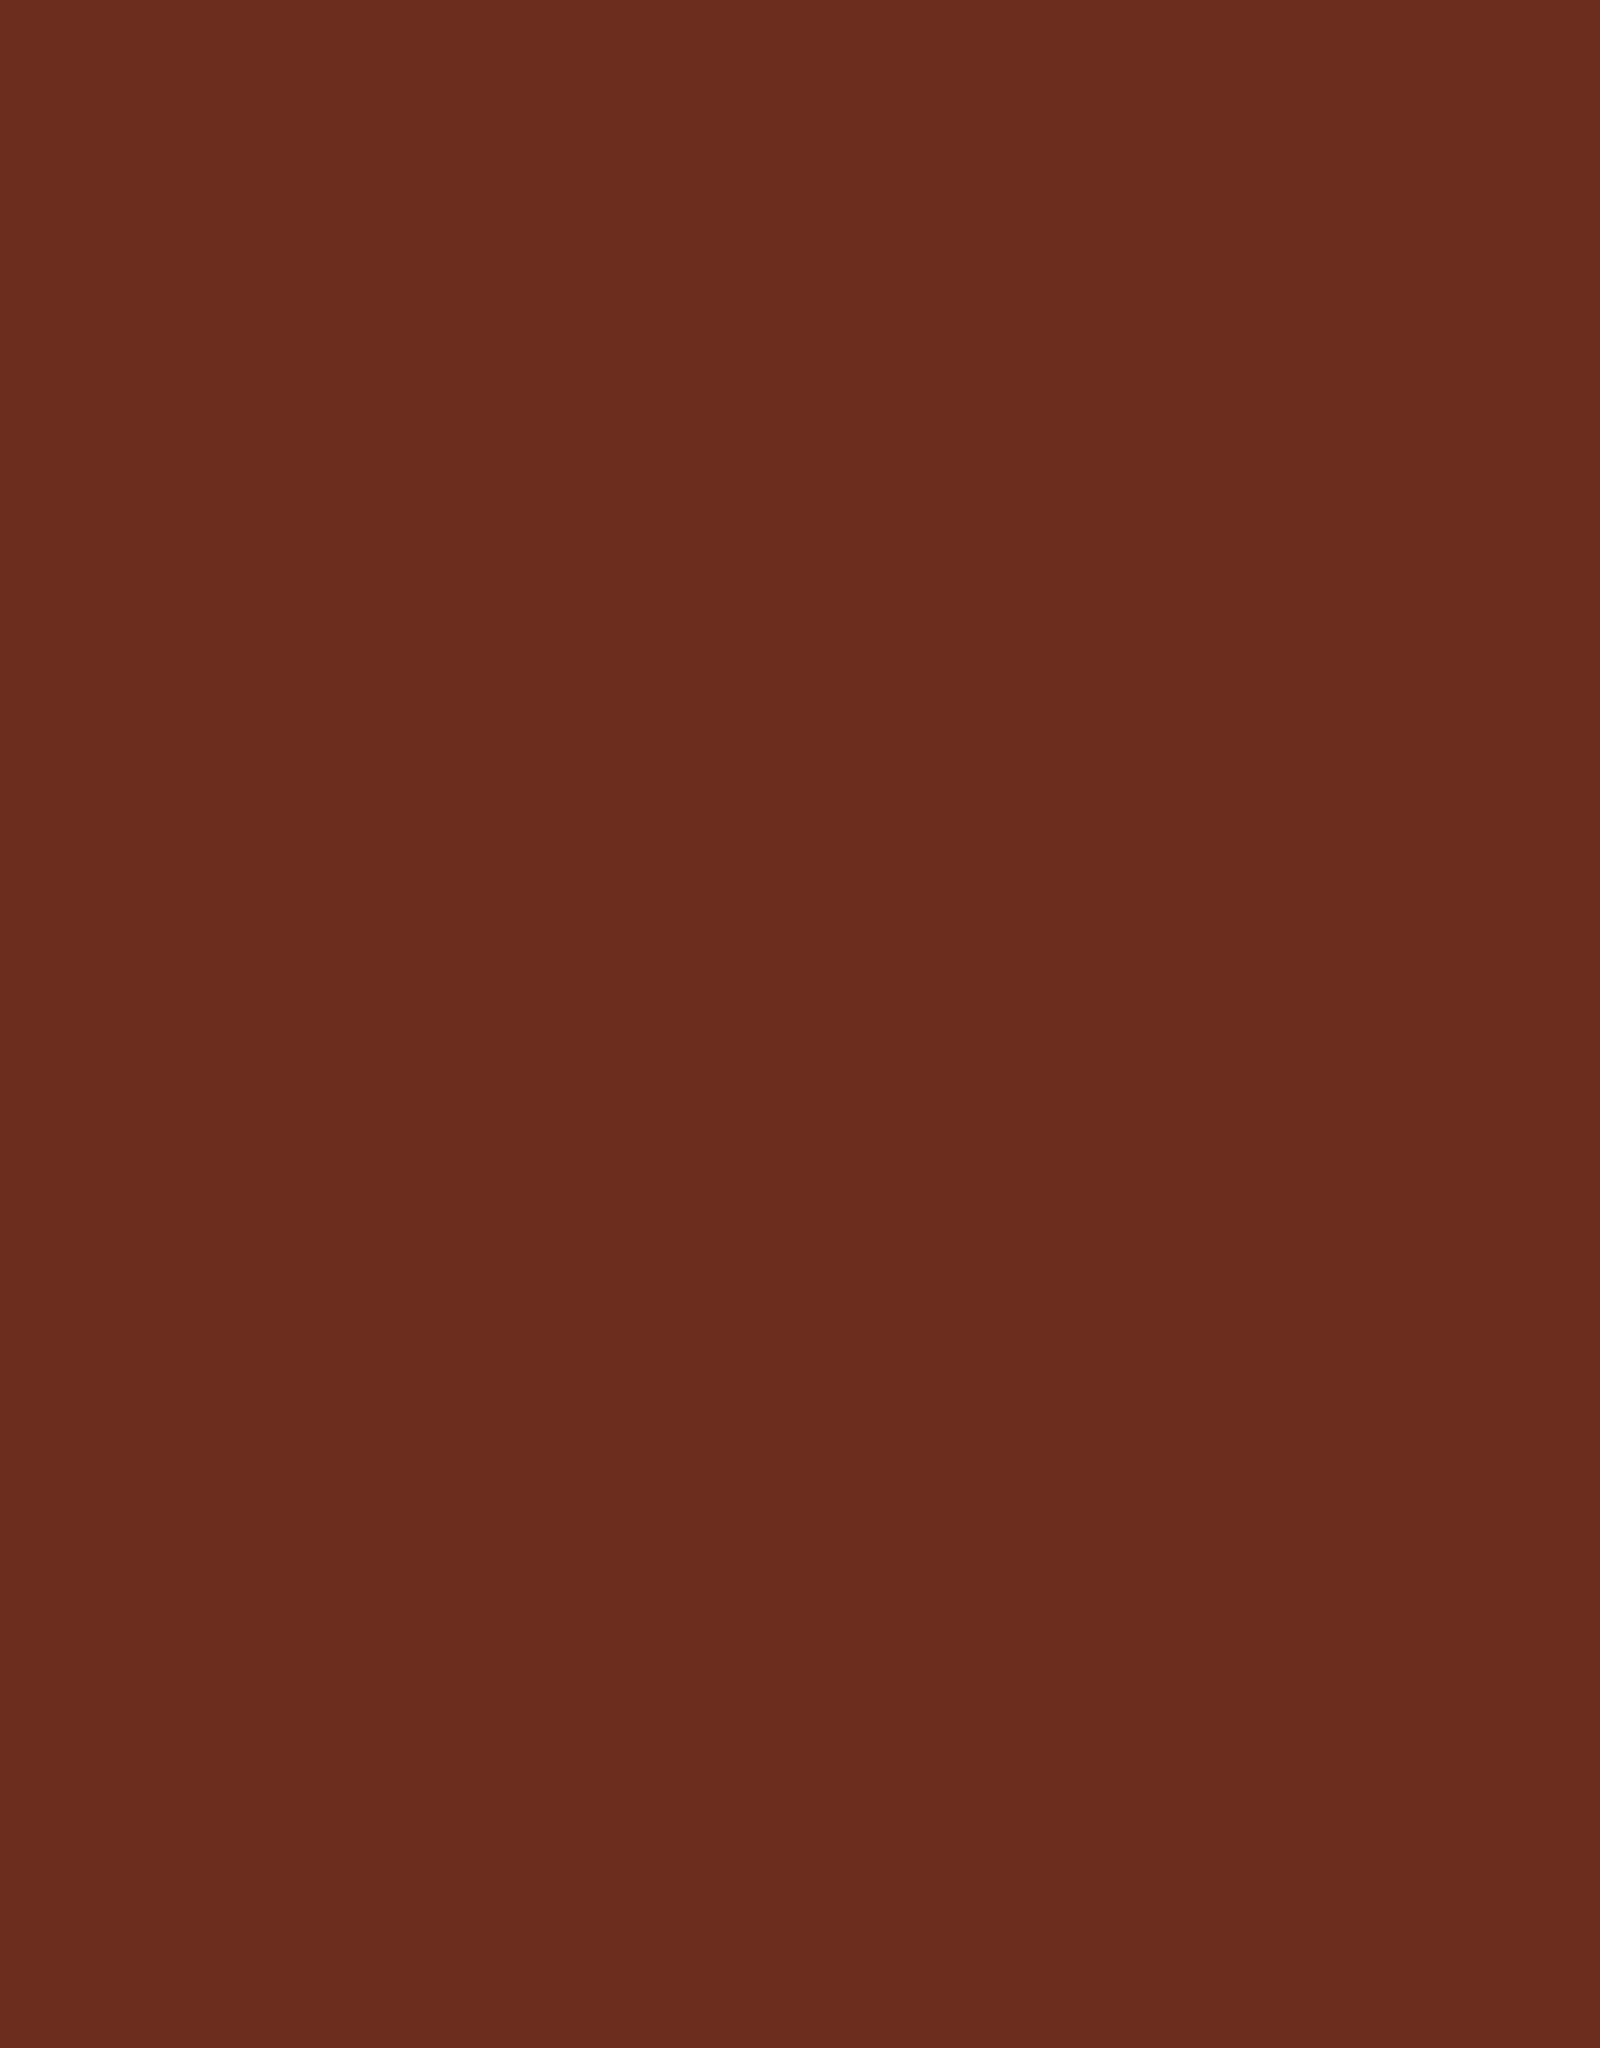 Golden Acrylic Paint HB Series 3 Transparent Red Iron Oxide